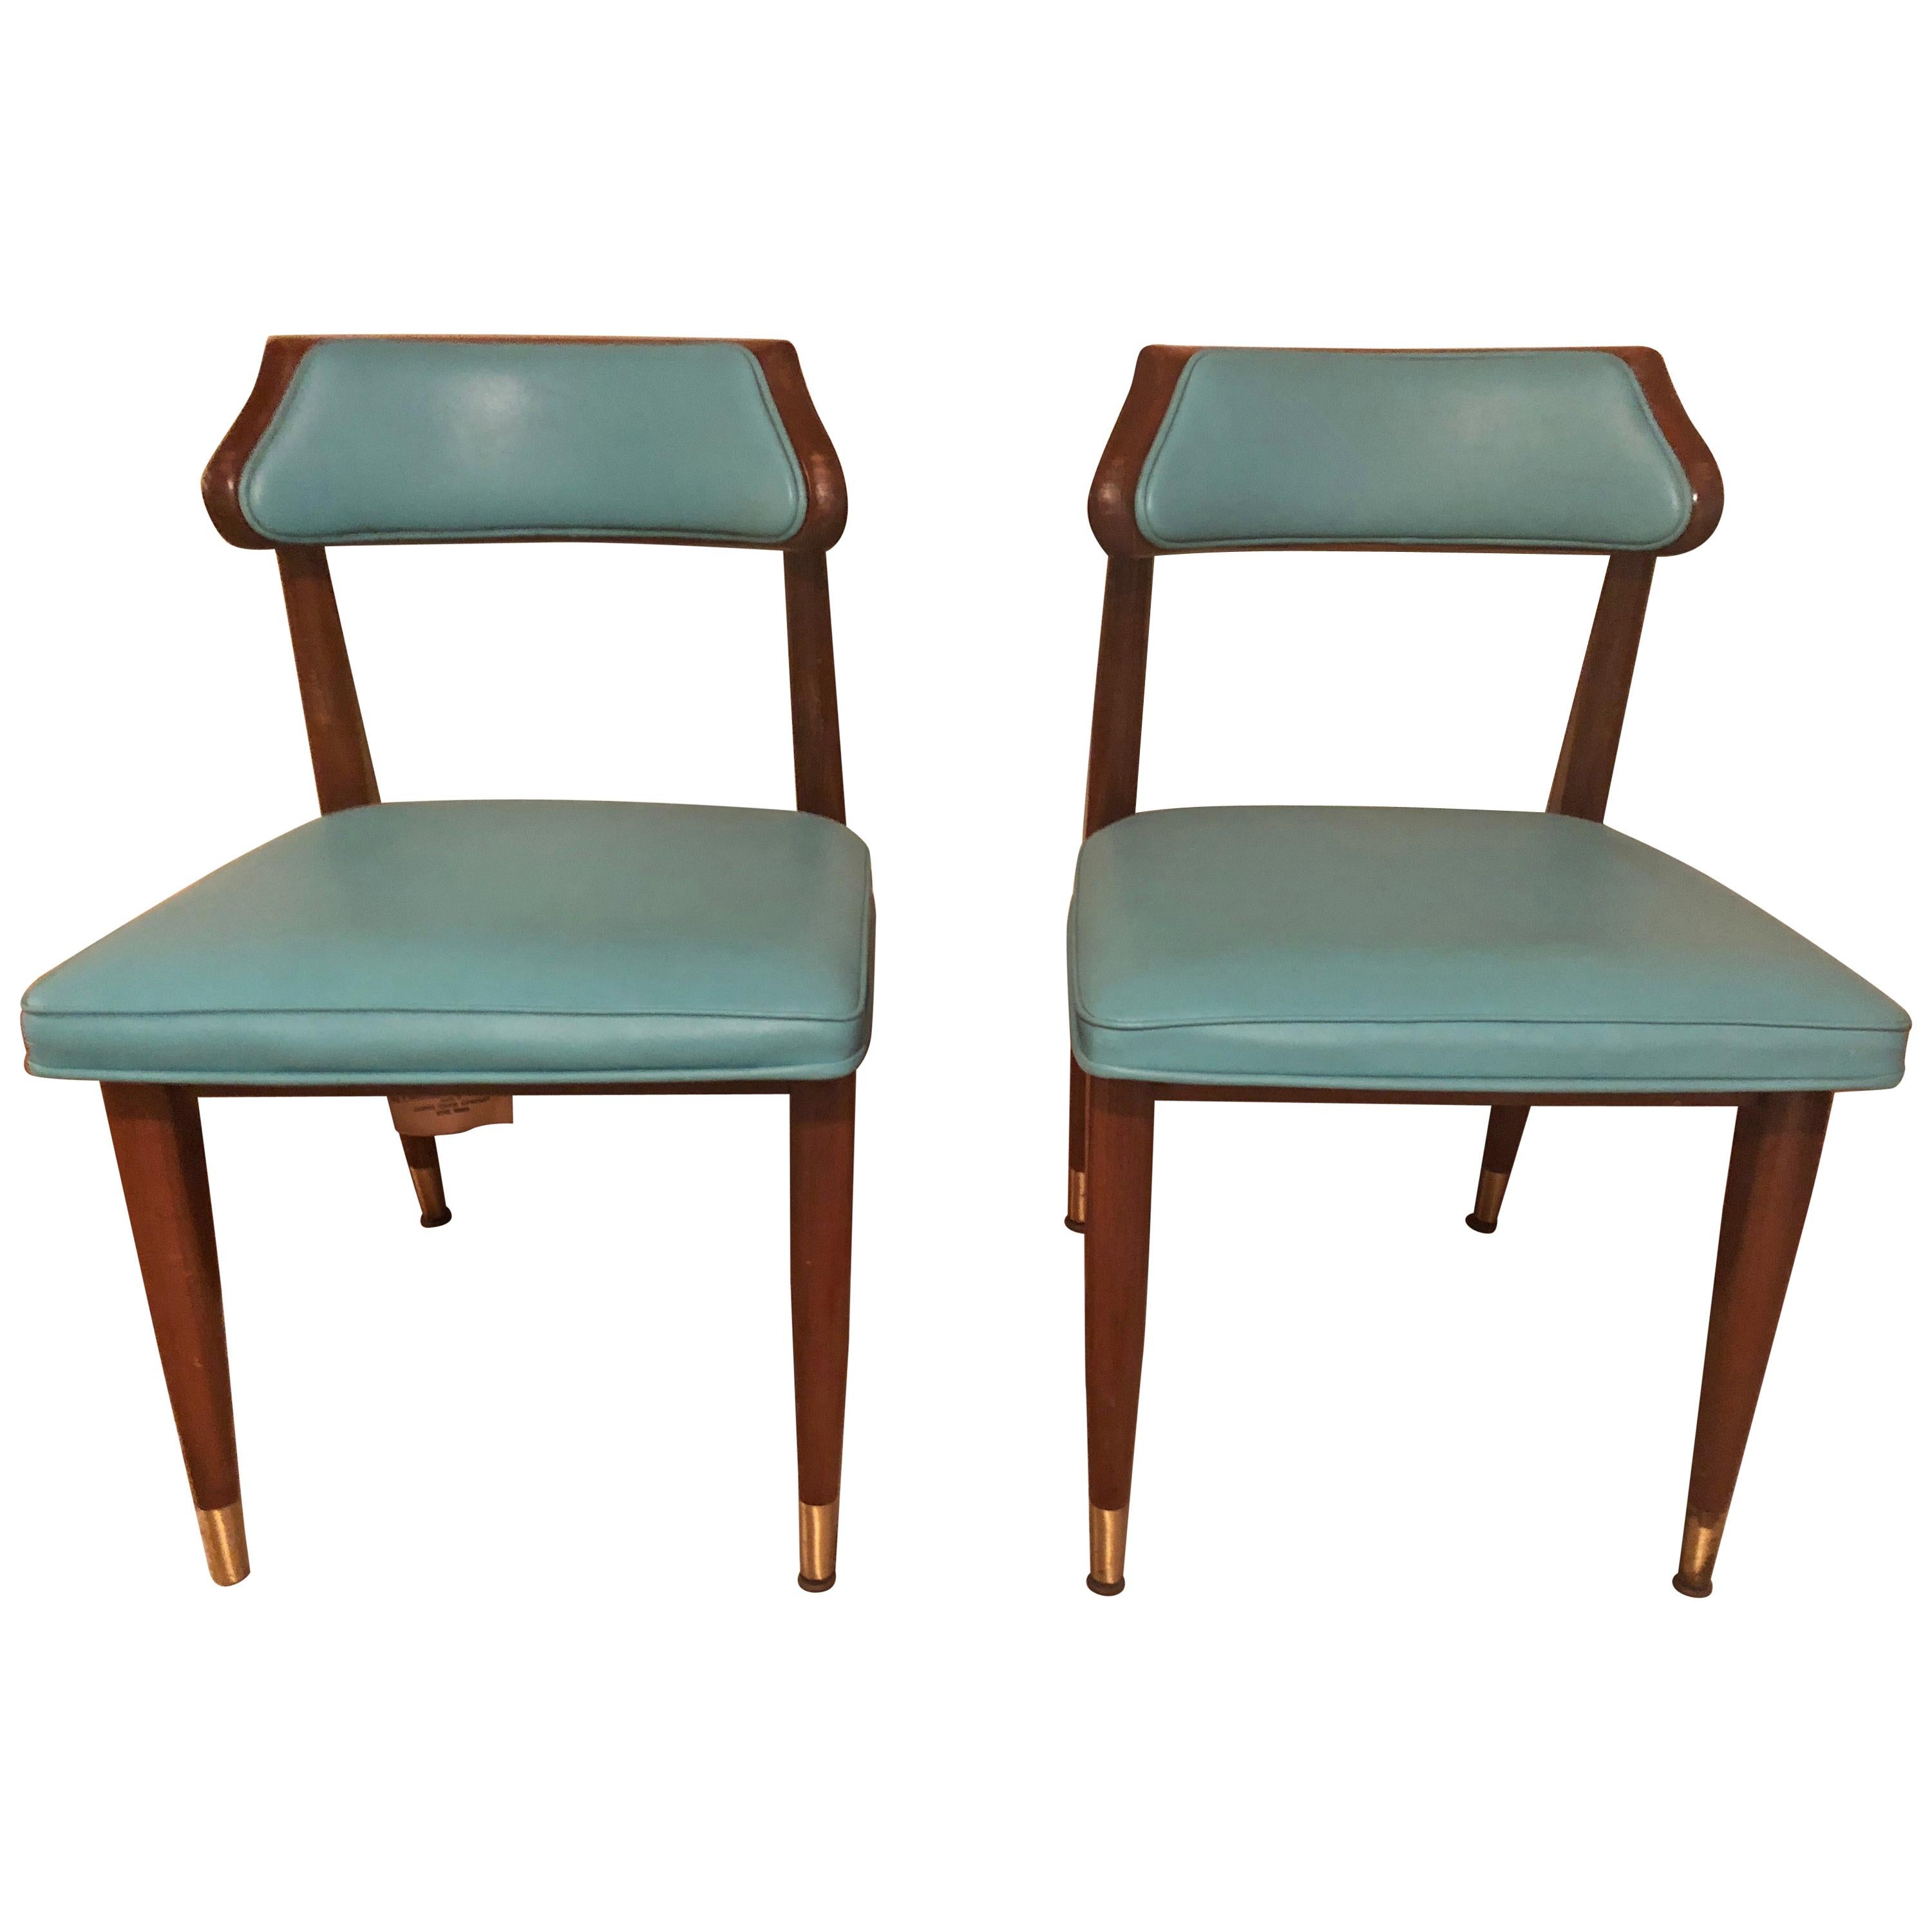 Pair of Midcentury Turquoise Walnut Desk or Occasional Side Chairs, 1960 For Sale